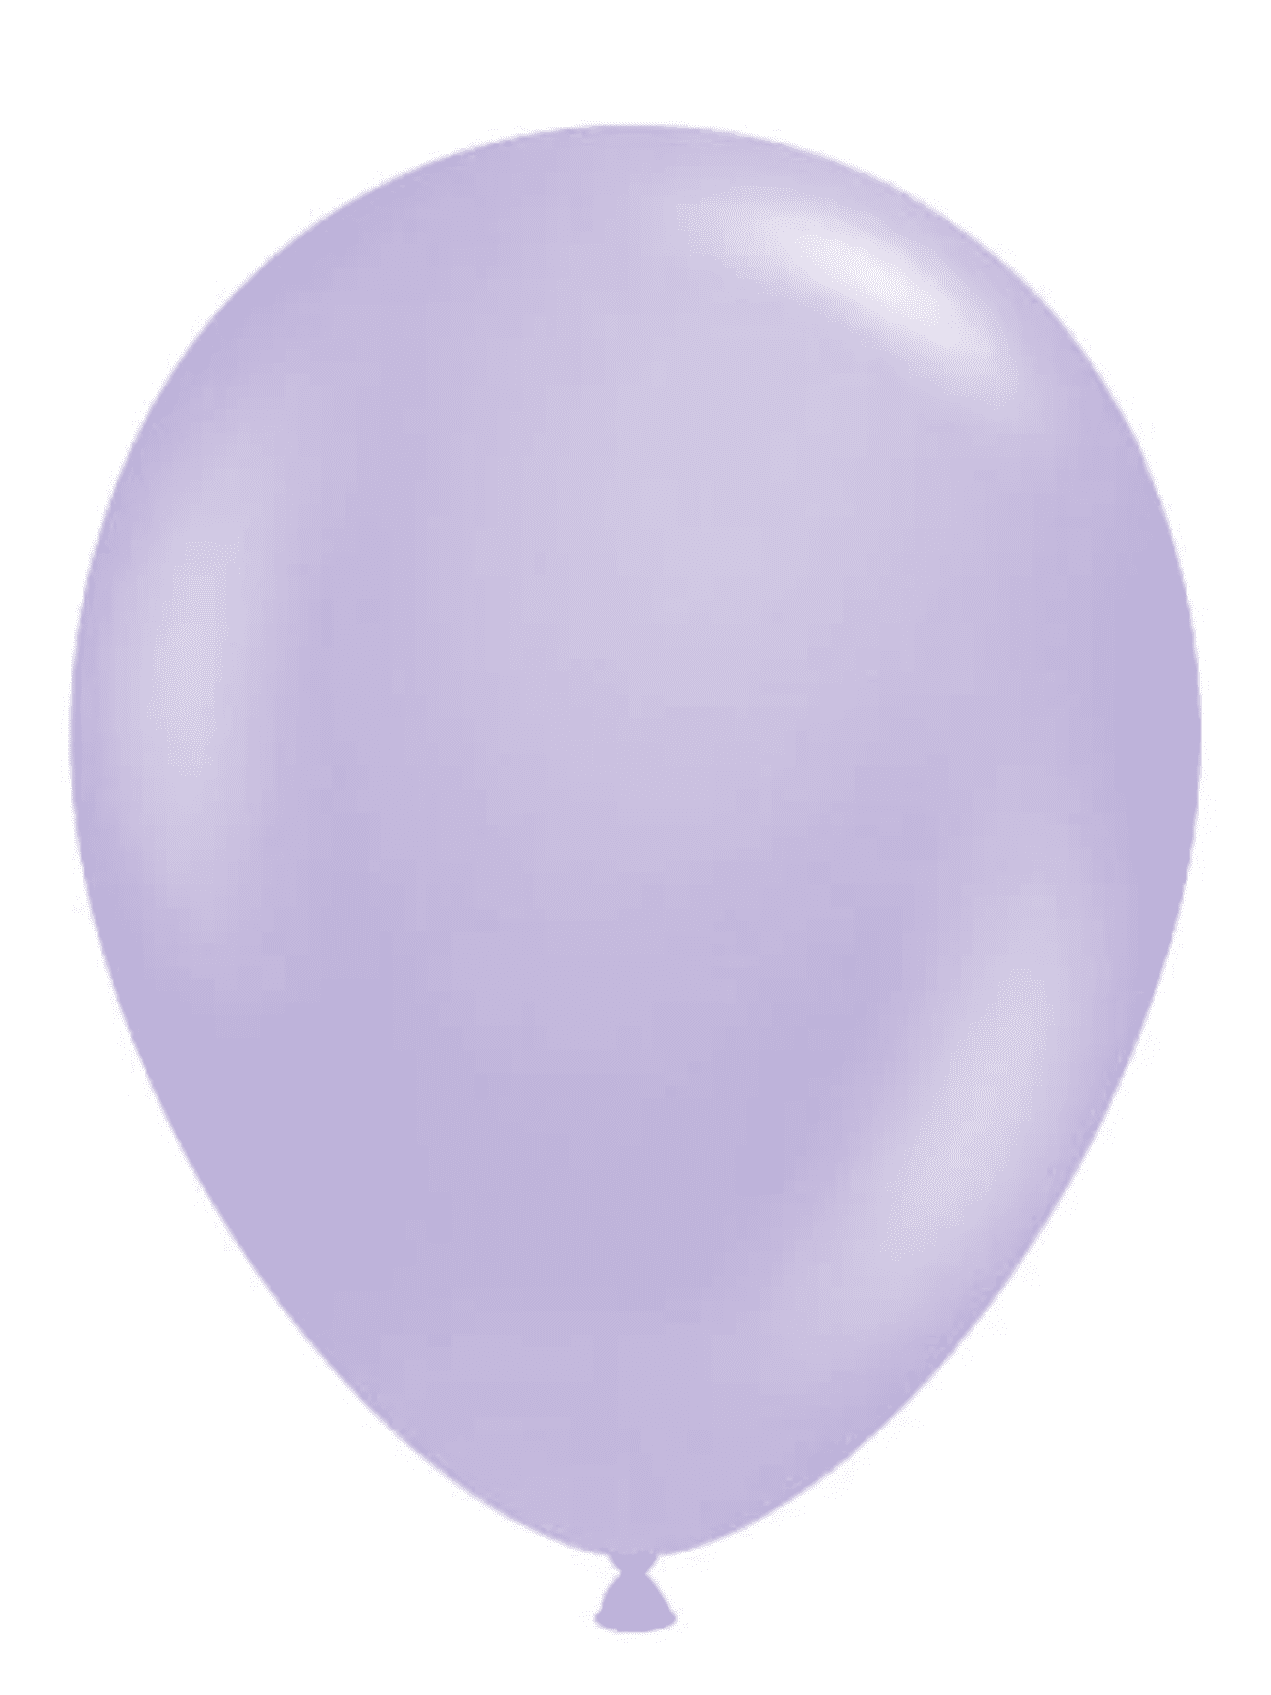 BLOSSOM - LILAC -  BALLOON in Sizes - small, regular or large Individual balloons Balloonz   